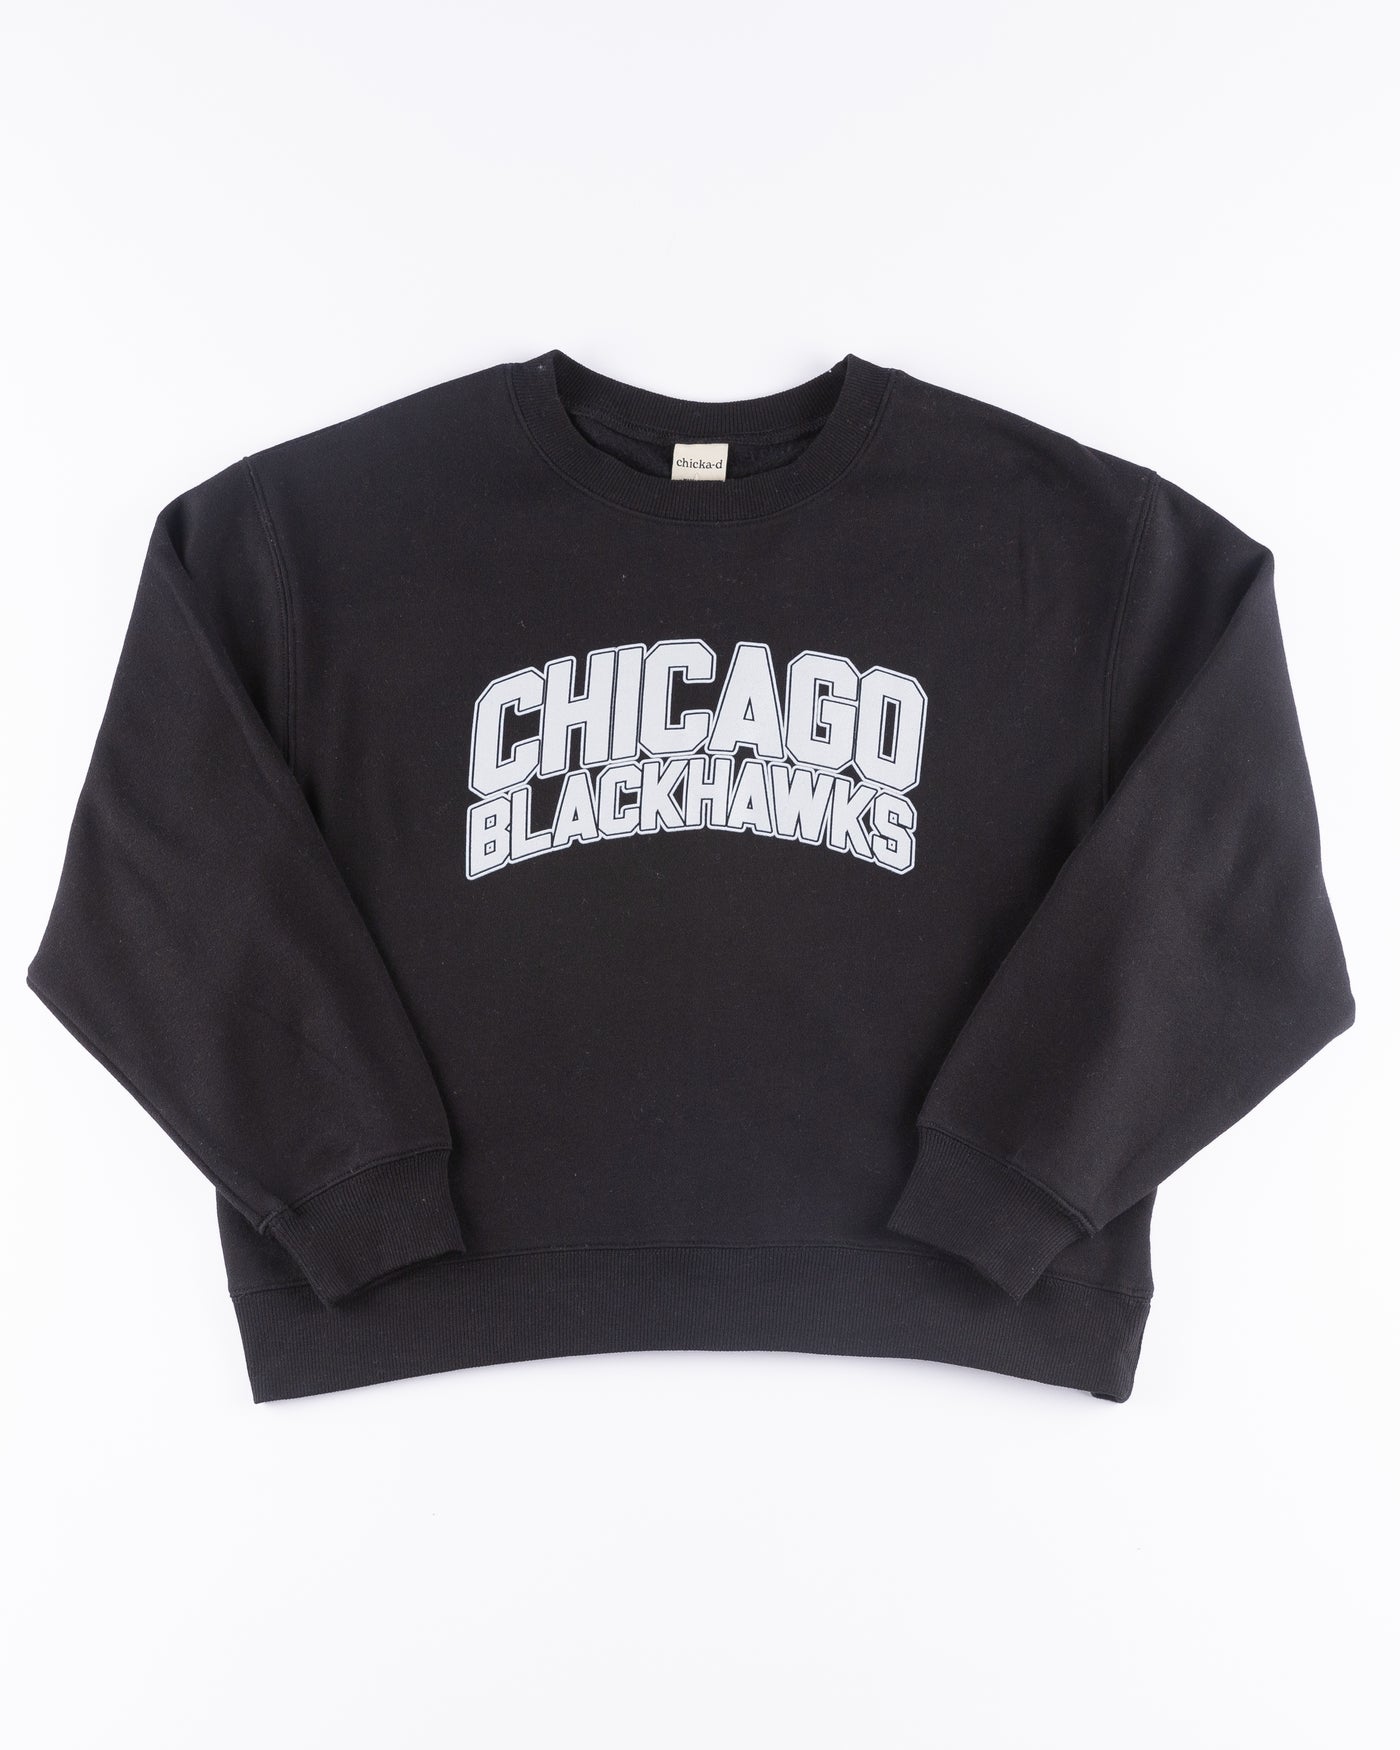 black chicka-d crewneck with Chicago Blackhawks wordmark across front - front lay flat